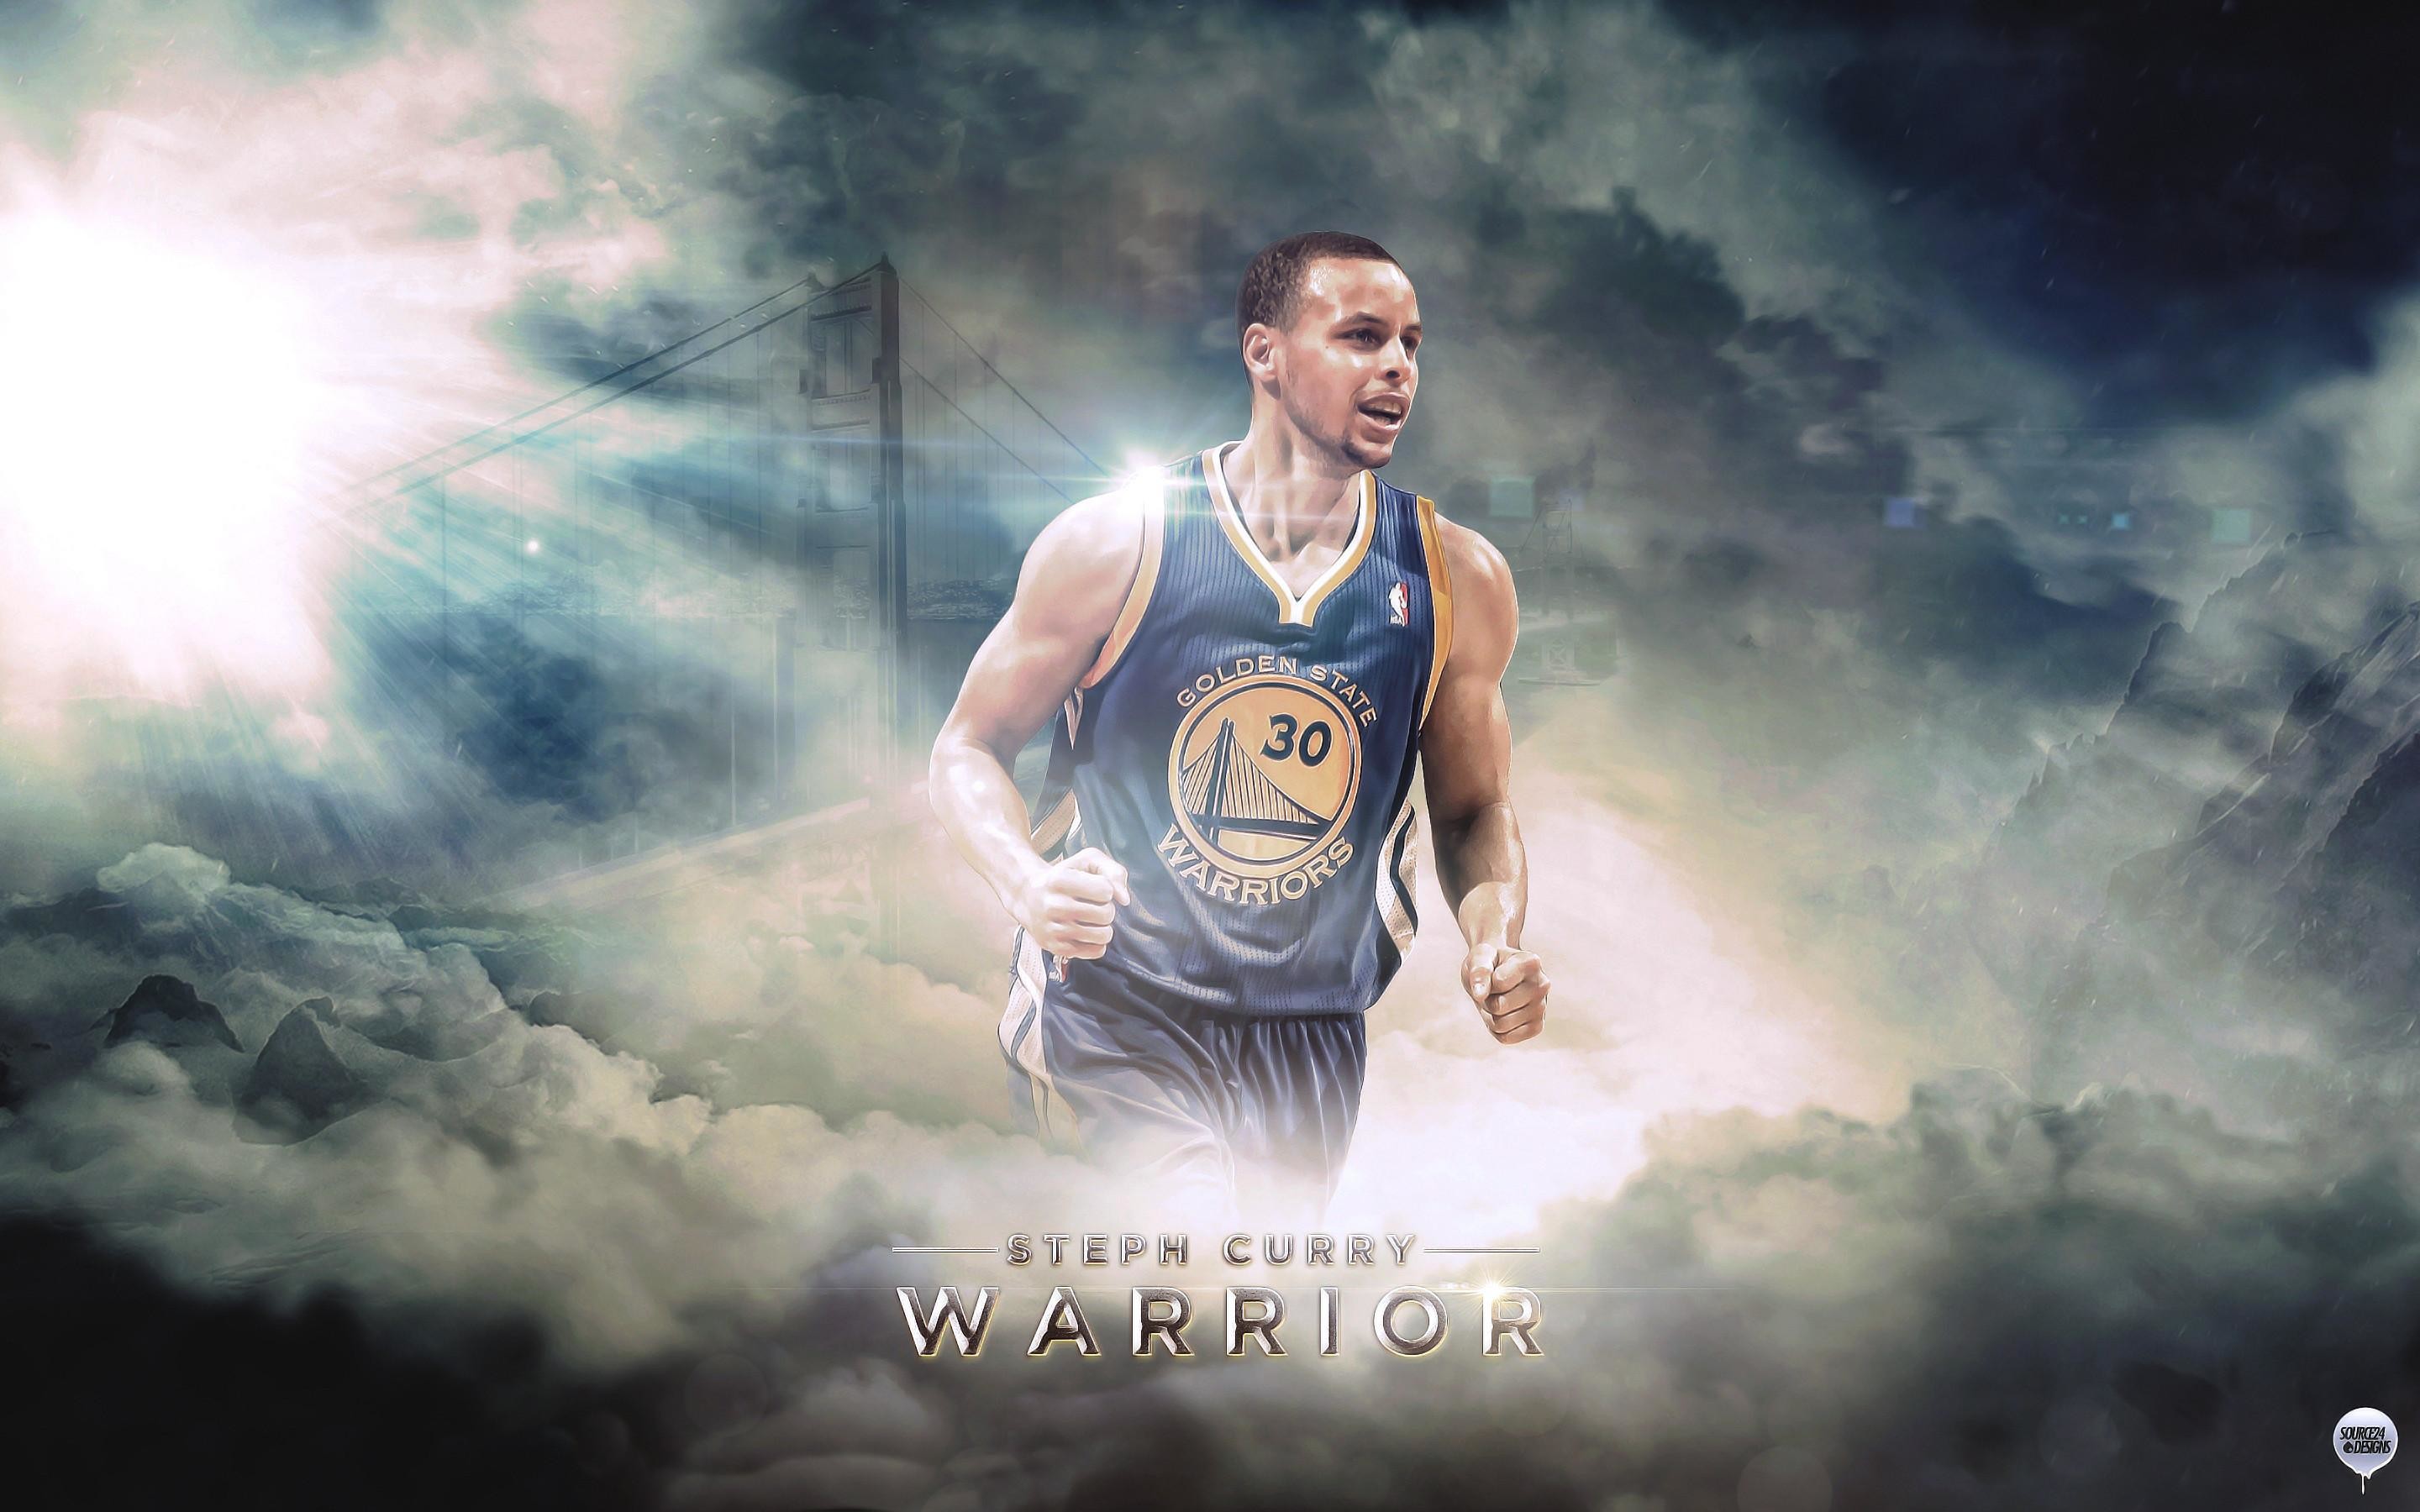 2880x1800 cool stephen curry wallpapers #439943. 1920x1200 Stephen Curry Wallpaper HD  for Basketball Fans | PixelsTalk.